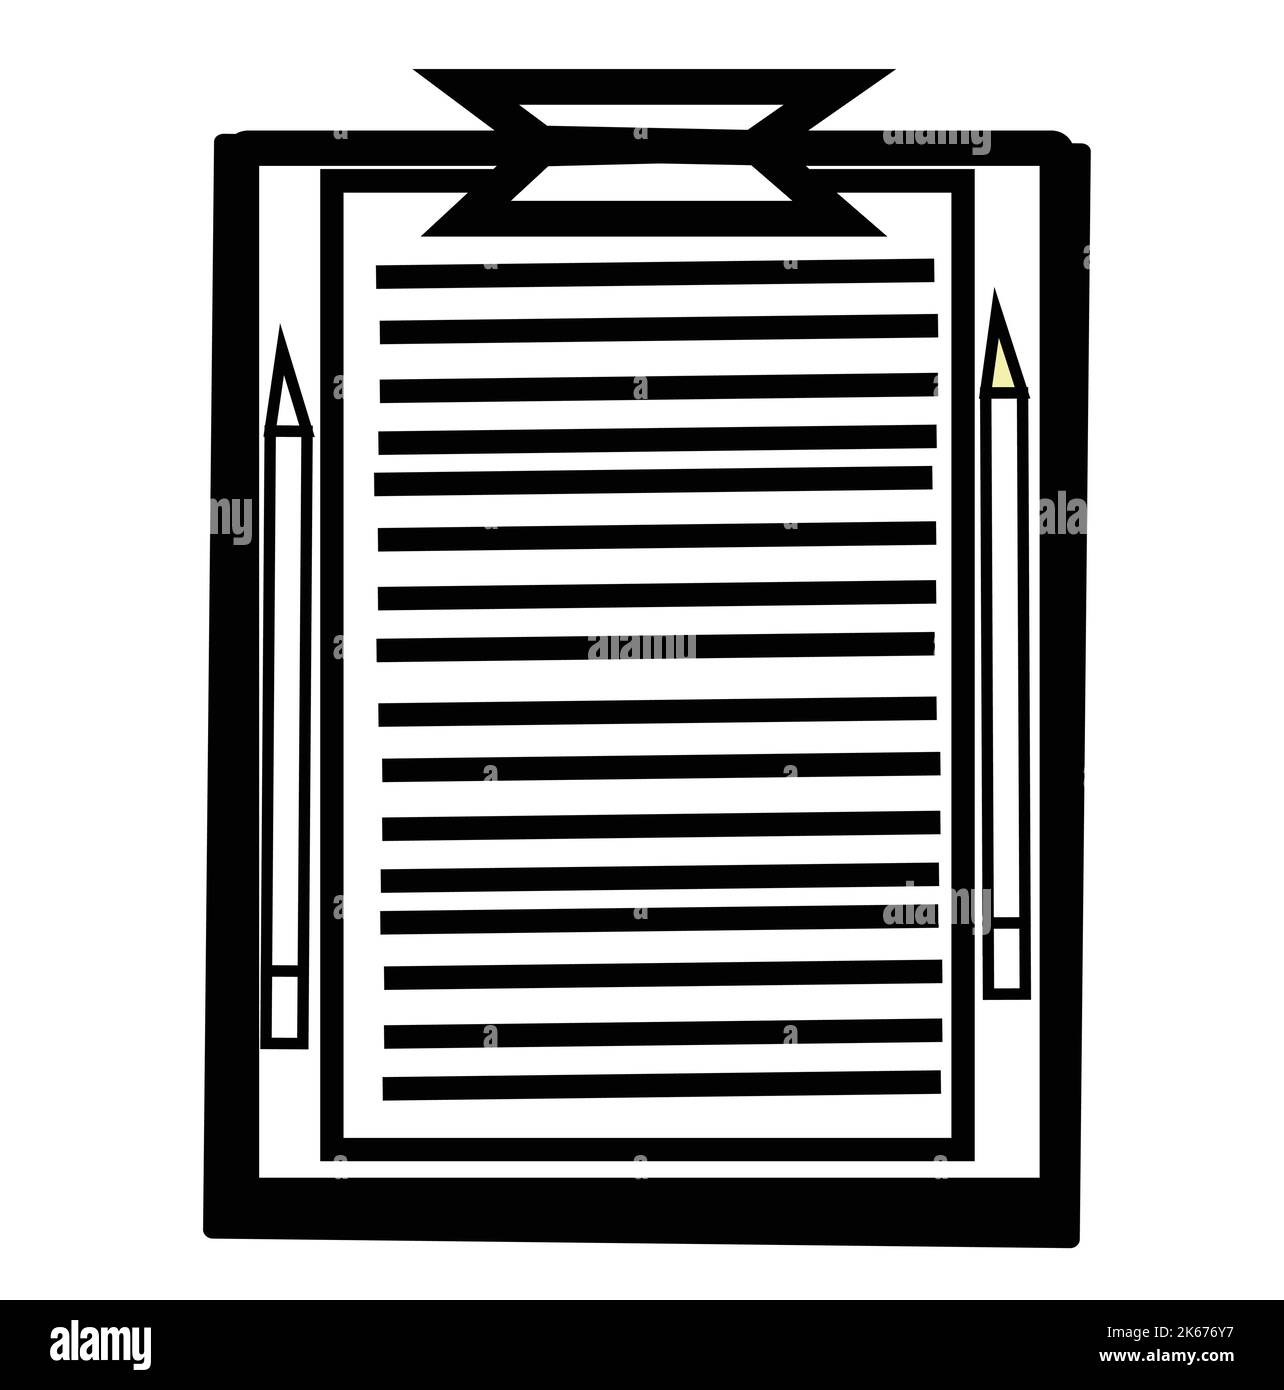 Exam board black and white with 2 pencils design. graphic source stock original vector drawing. Stock Vector